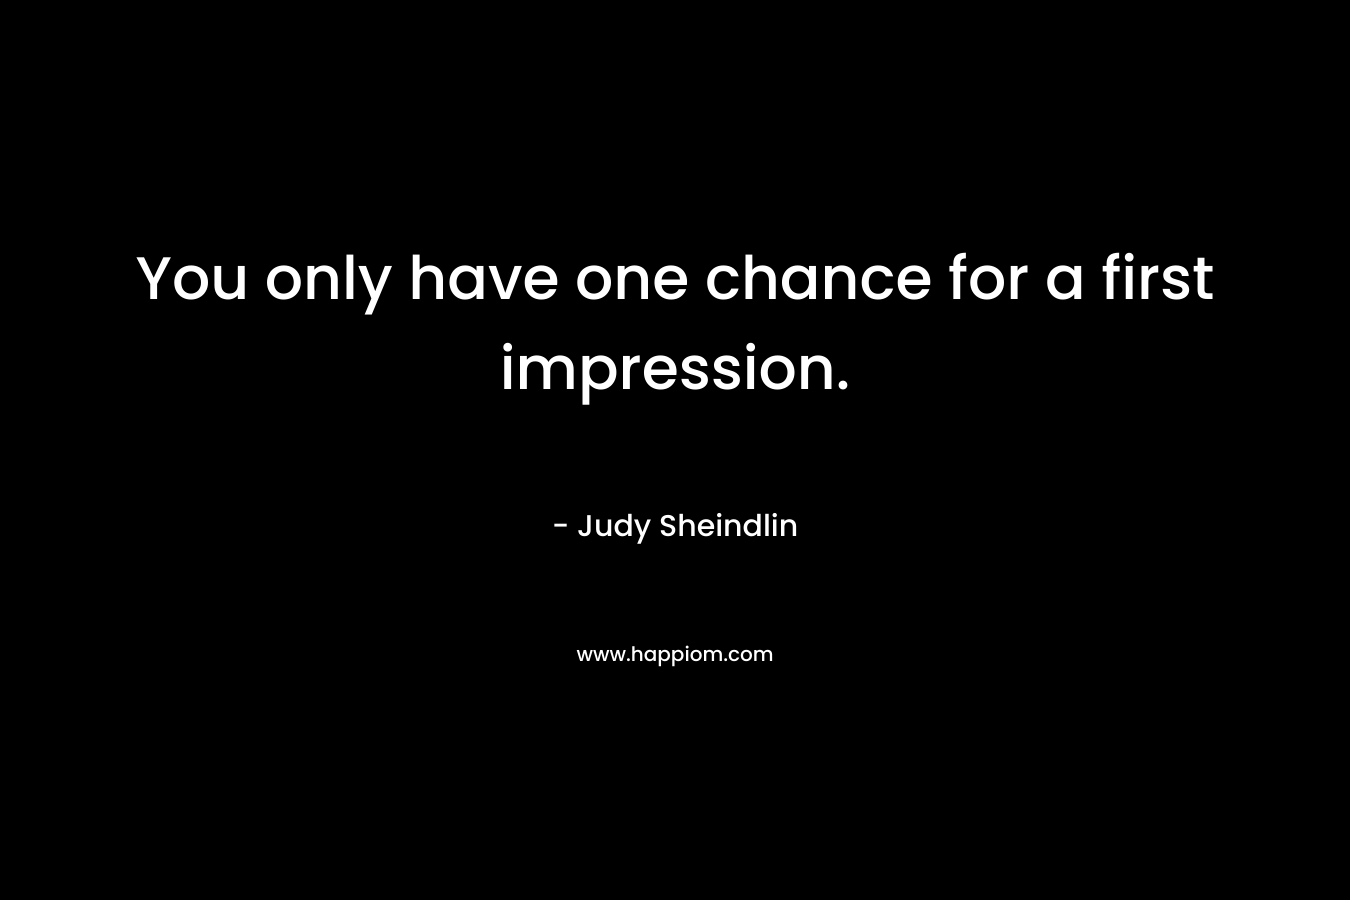 You only have one chance for a first impression.